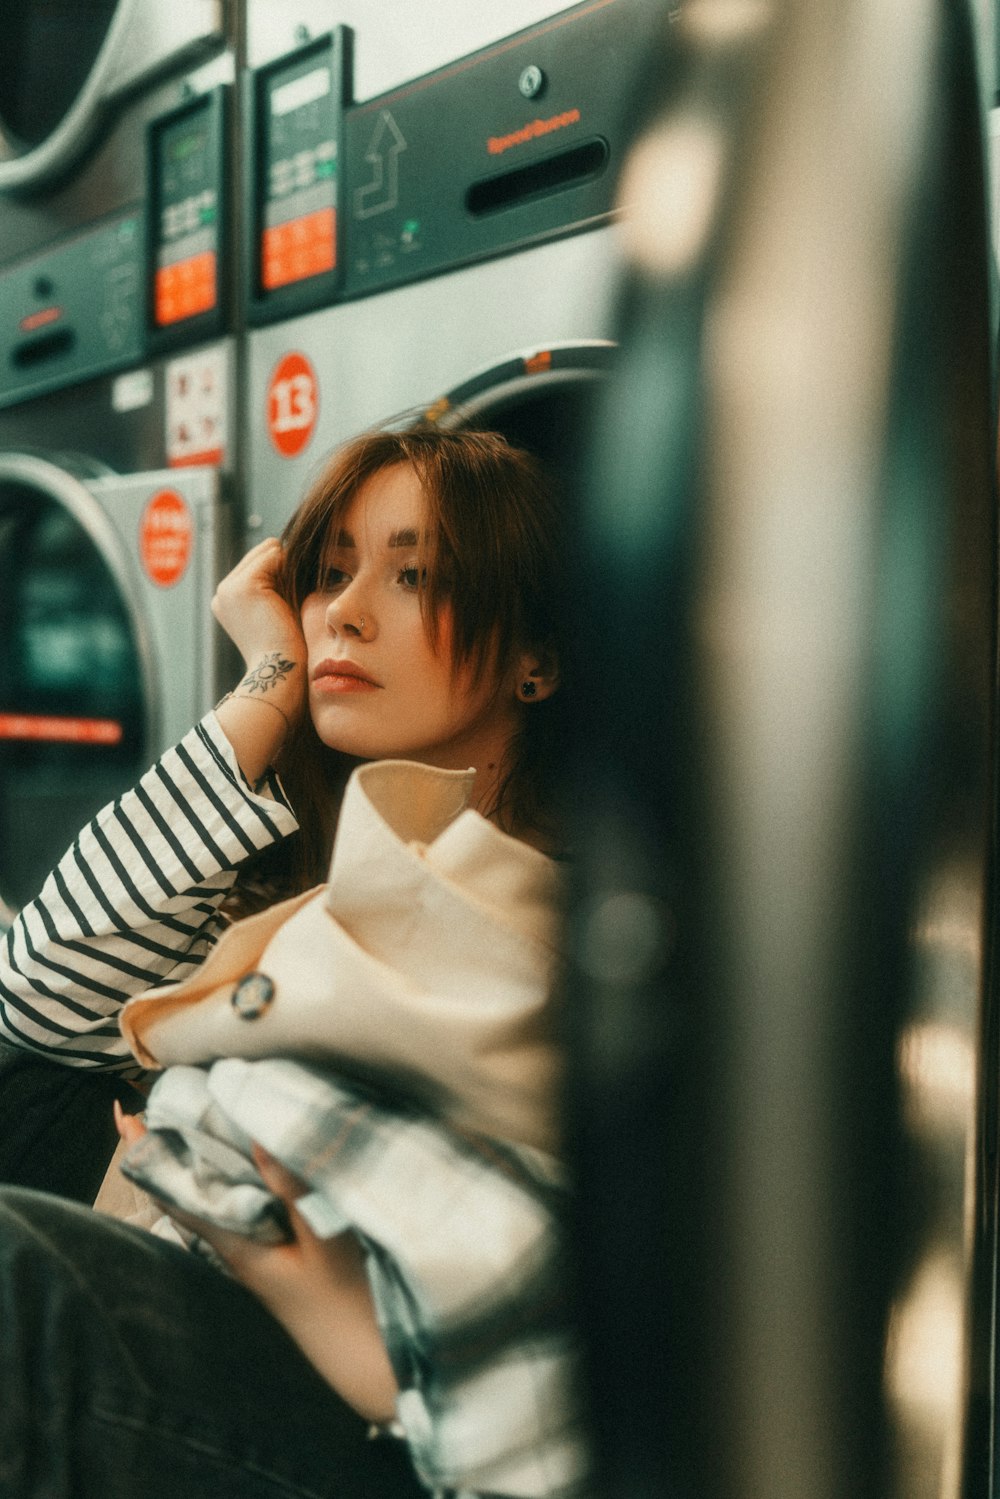 a woman sitting on a train next to a washer